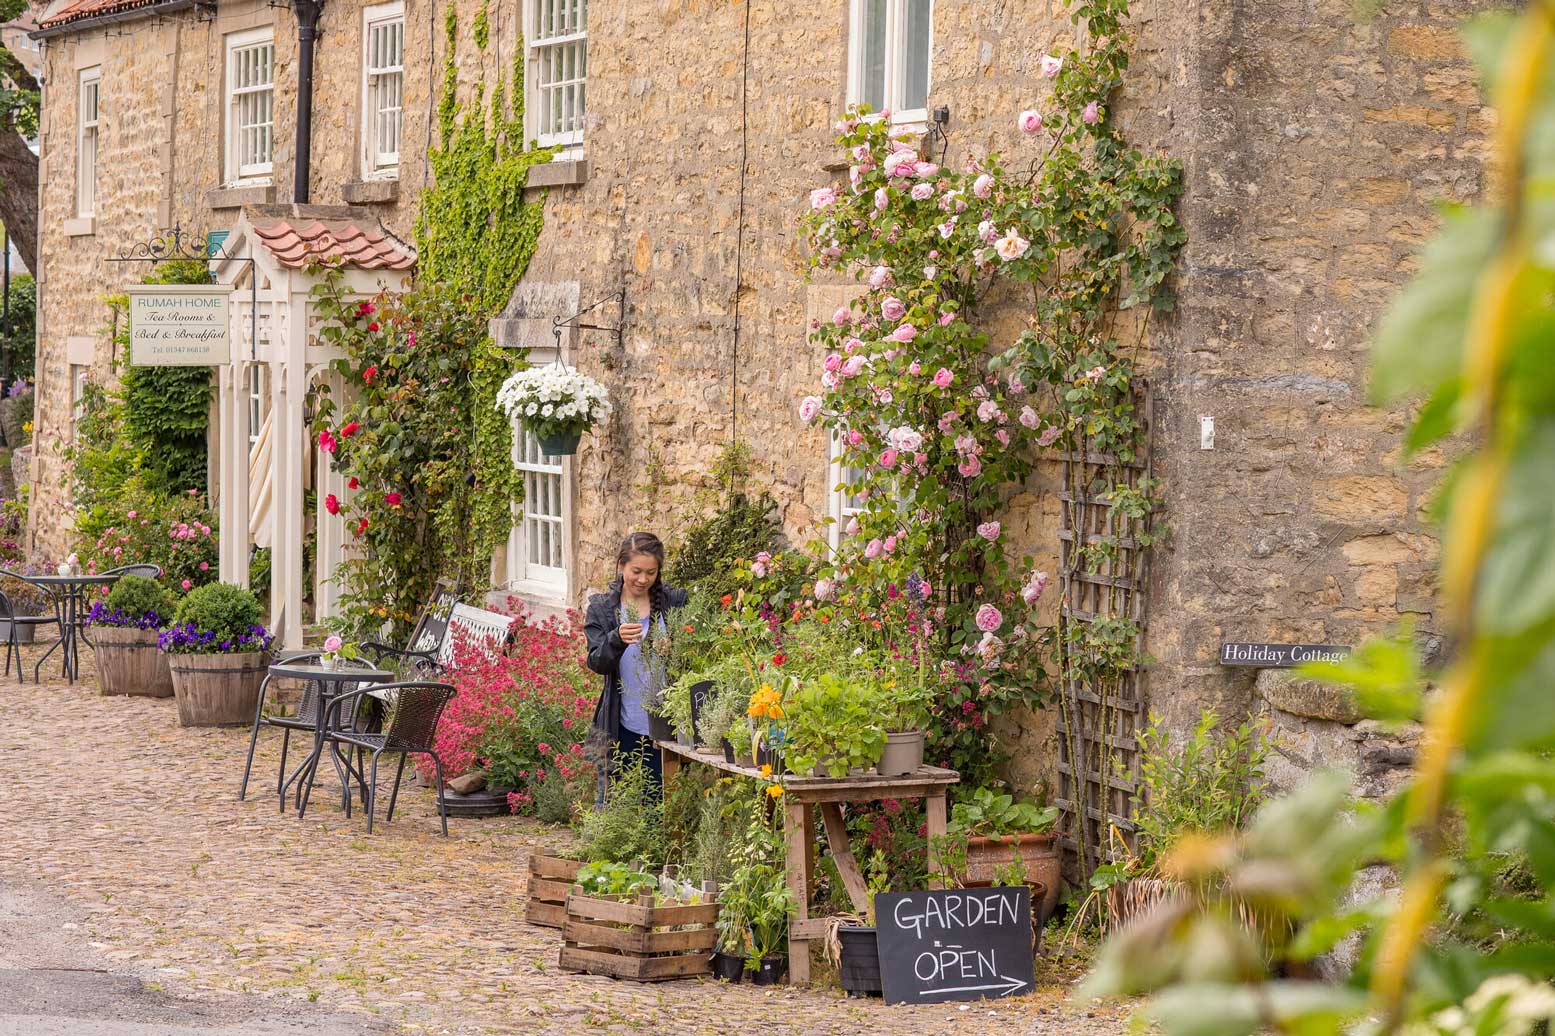 A person stands beside a rustic display of vibrant flowers and plants set up on wooden crates in a quaint stone-walled village street. A sign reading "GARDEN OPEN" is prominently displayed next to the flower arrangements. In the background, the scene is complemented by historical buildings with visible signage, lush climbing roses, and outdoor furniture, creating a peaceful and charming atmosphere. Credit Dependable Productions.